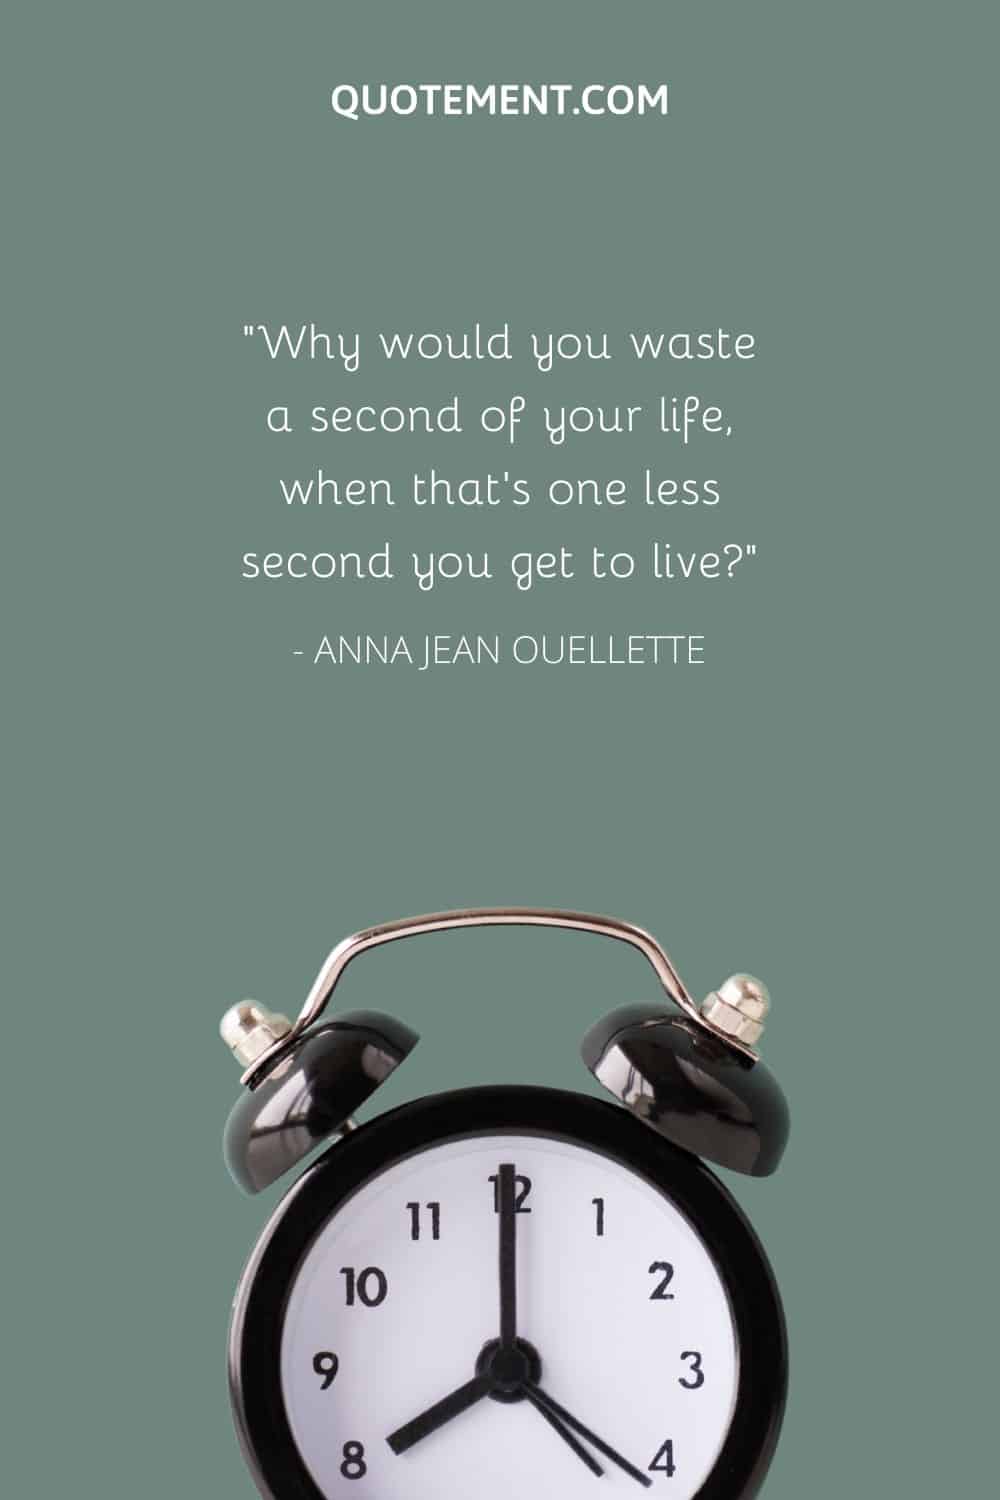 Why would you waste a second of your life, when that's one less second you get to live